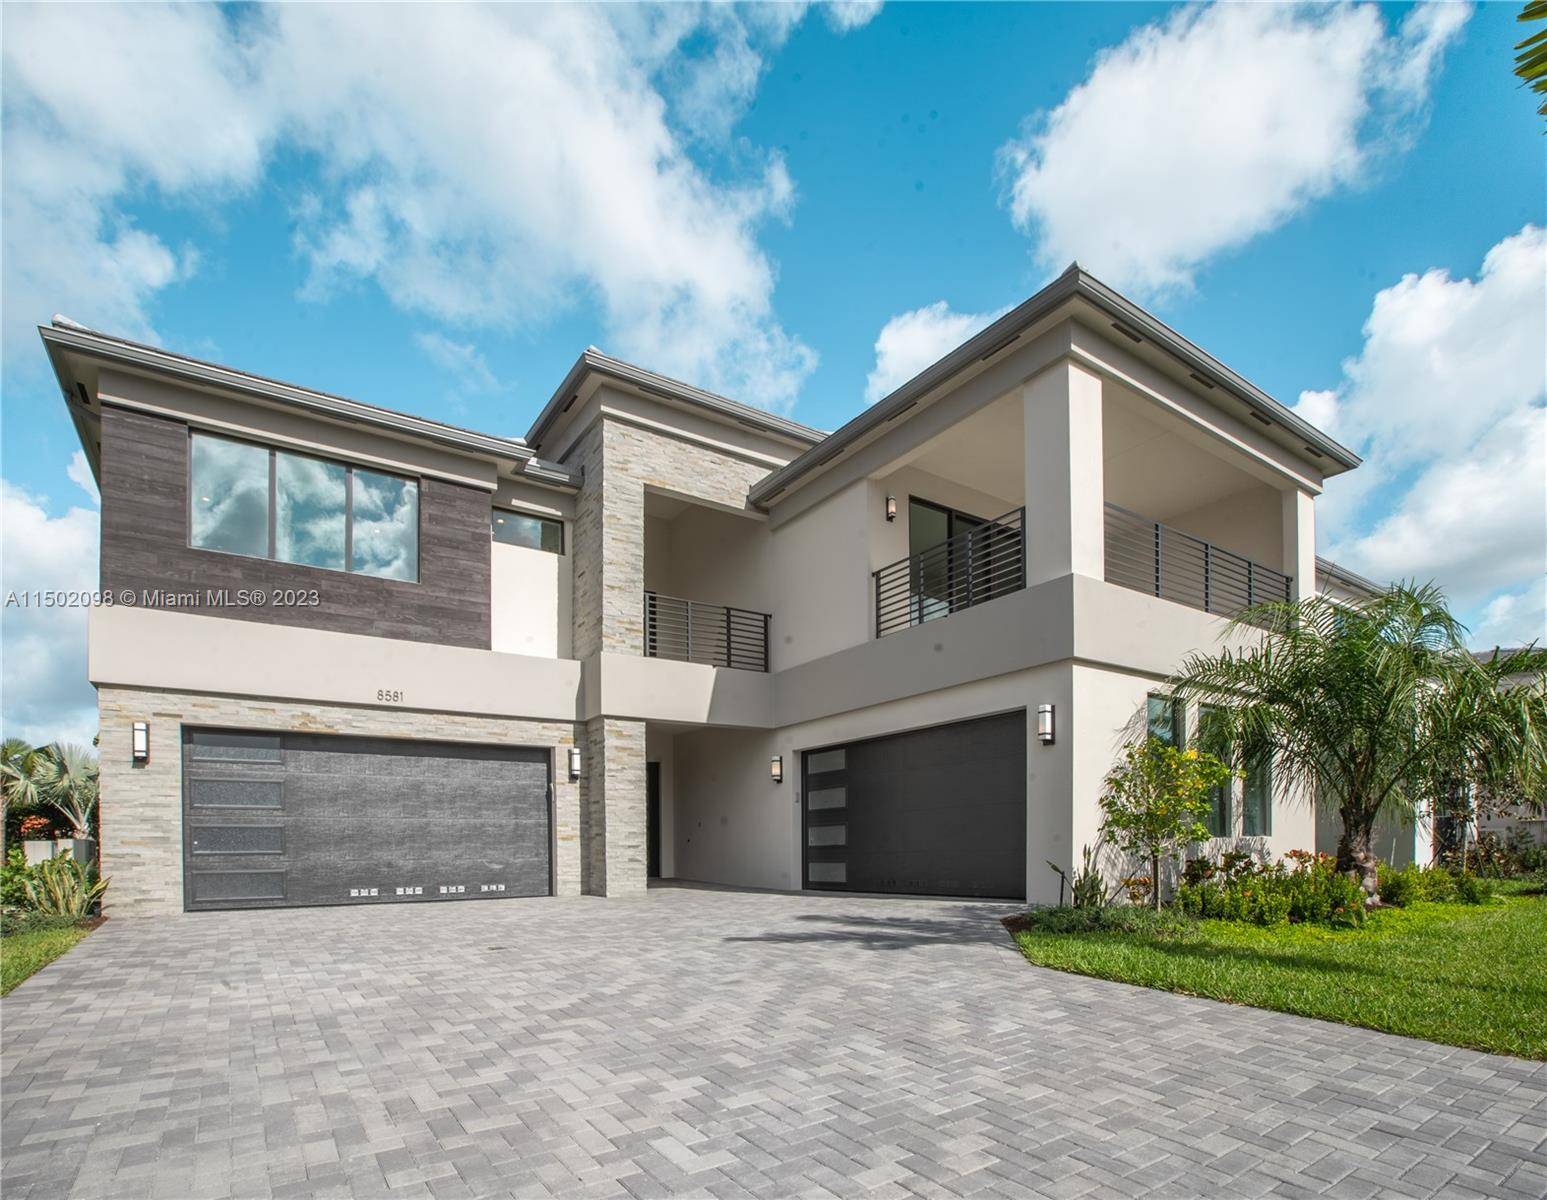 Don t miss this unique opportunity to own an ultra modern home at Lotus Palm in Boca Raton.